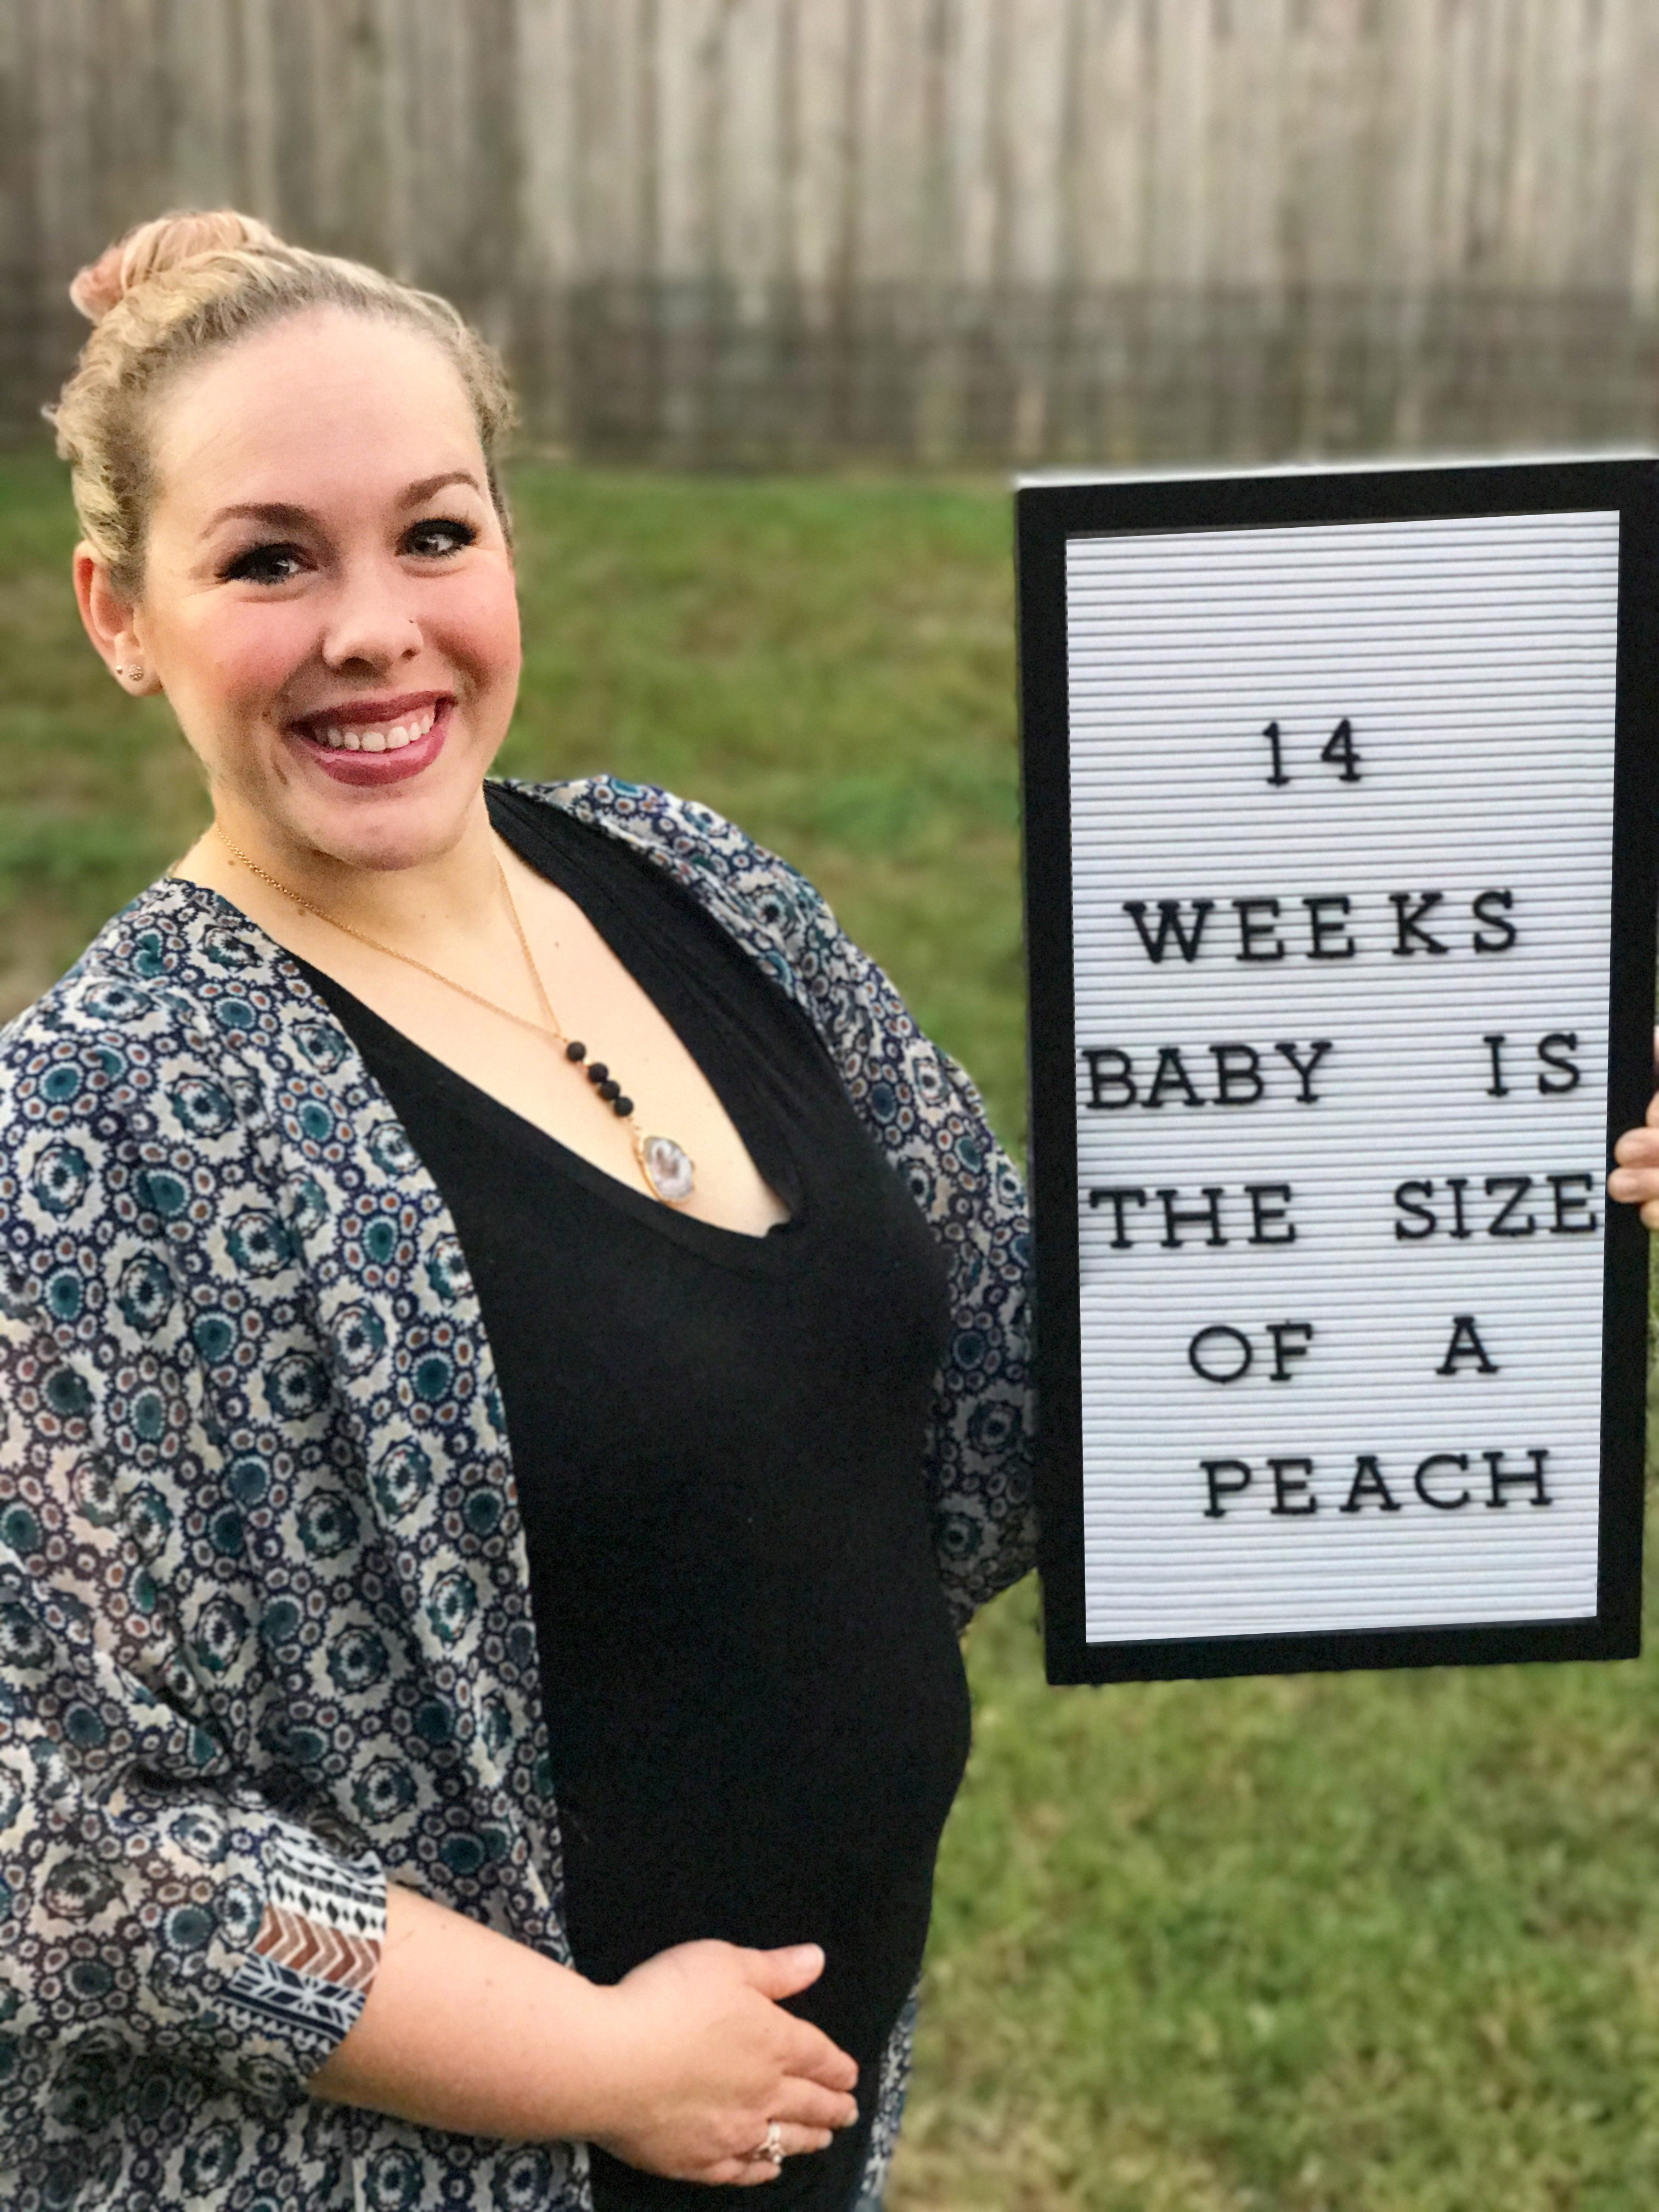 Love this baby bump letter board bumpdate by The Vintage Modern Wife. 14 weeks pregnant!